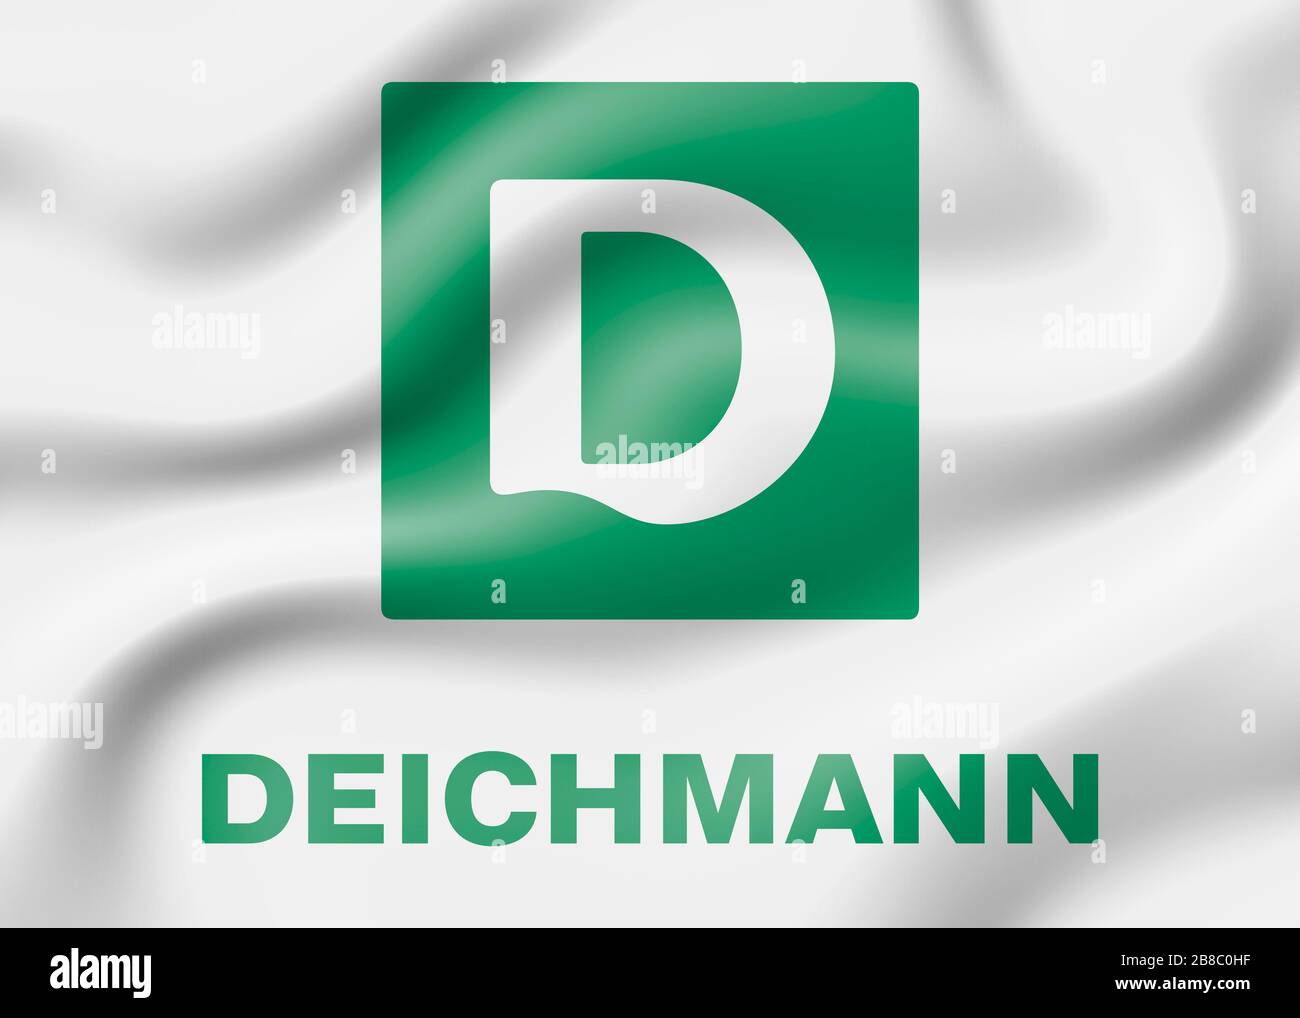 Deichmann Logo High Resolution Stock Photography and Images - Alamy